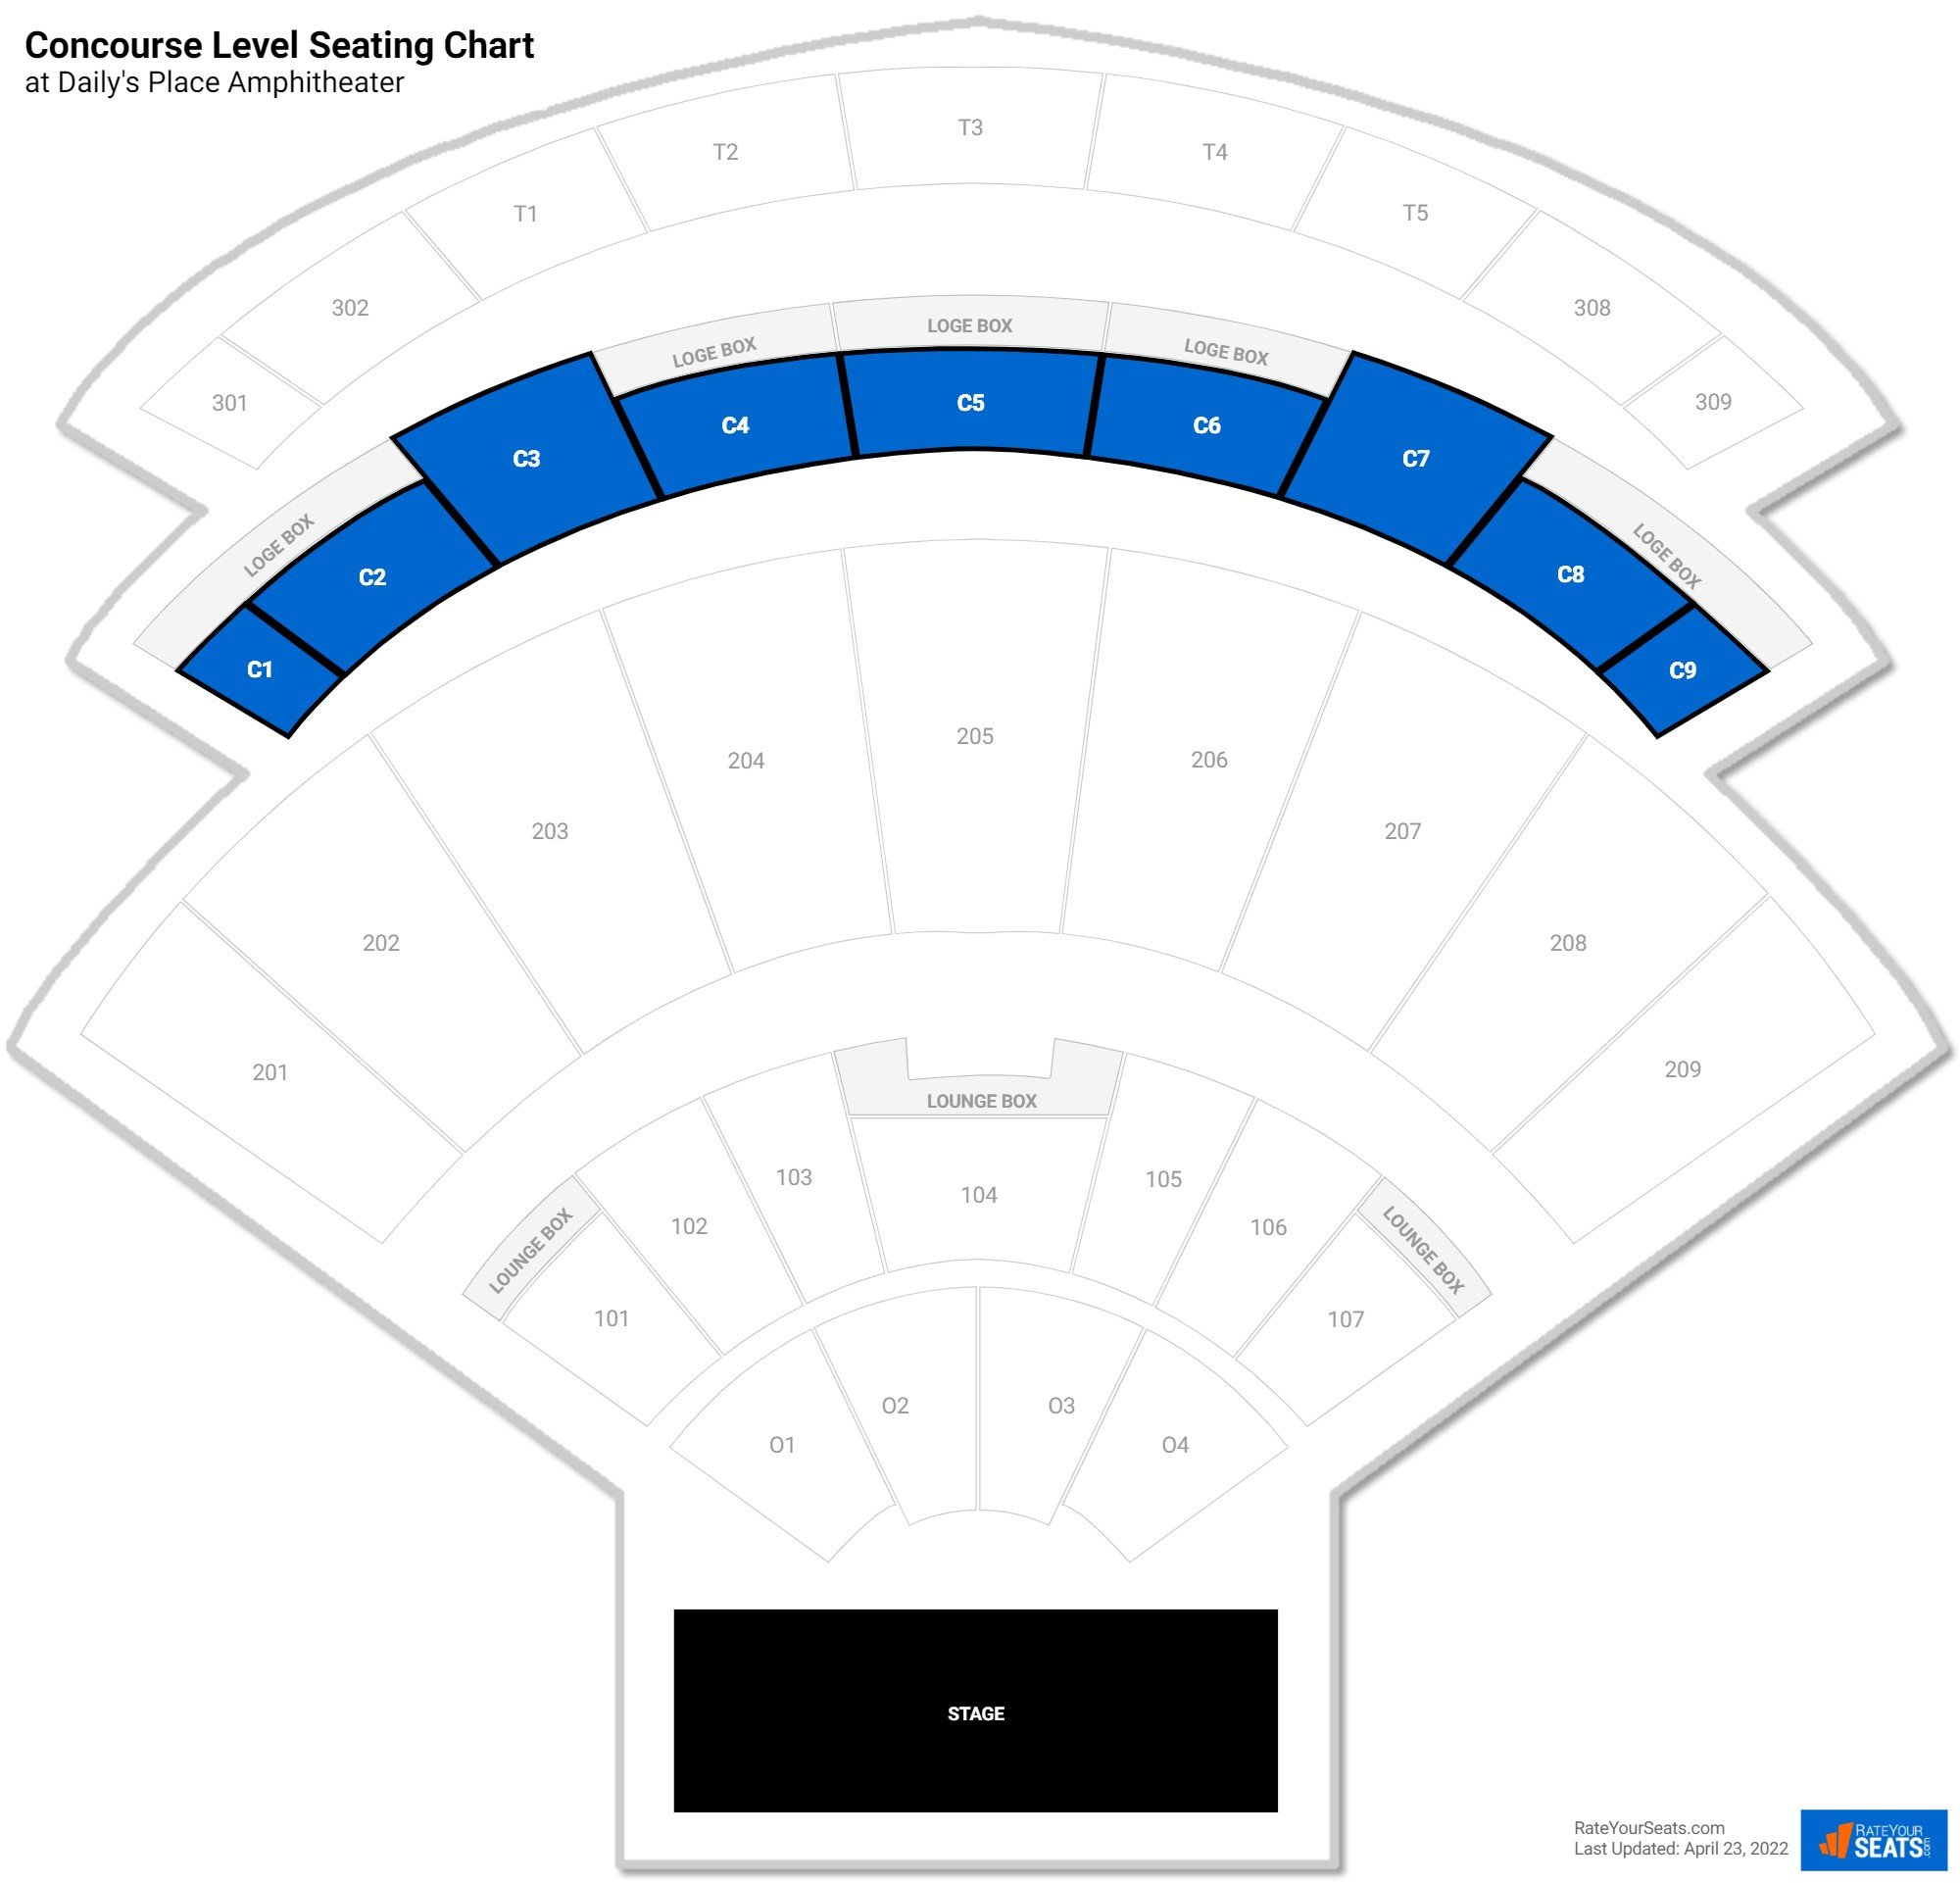 Concert Concourse Level Seating Chart at Daily